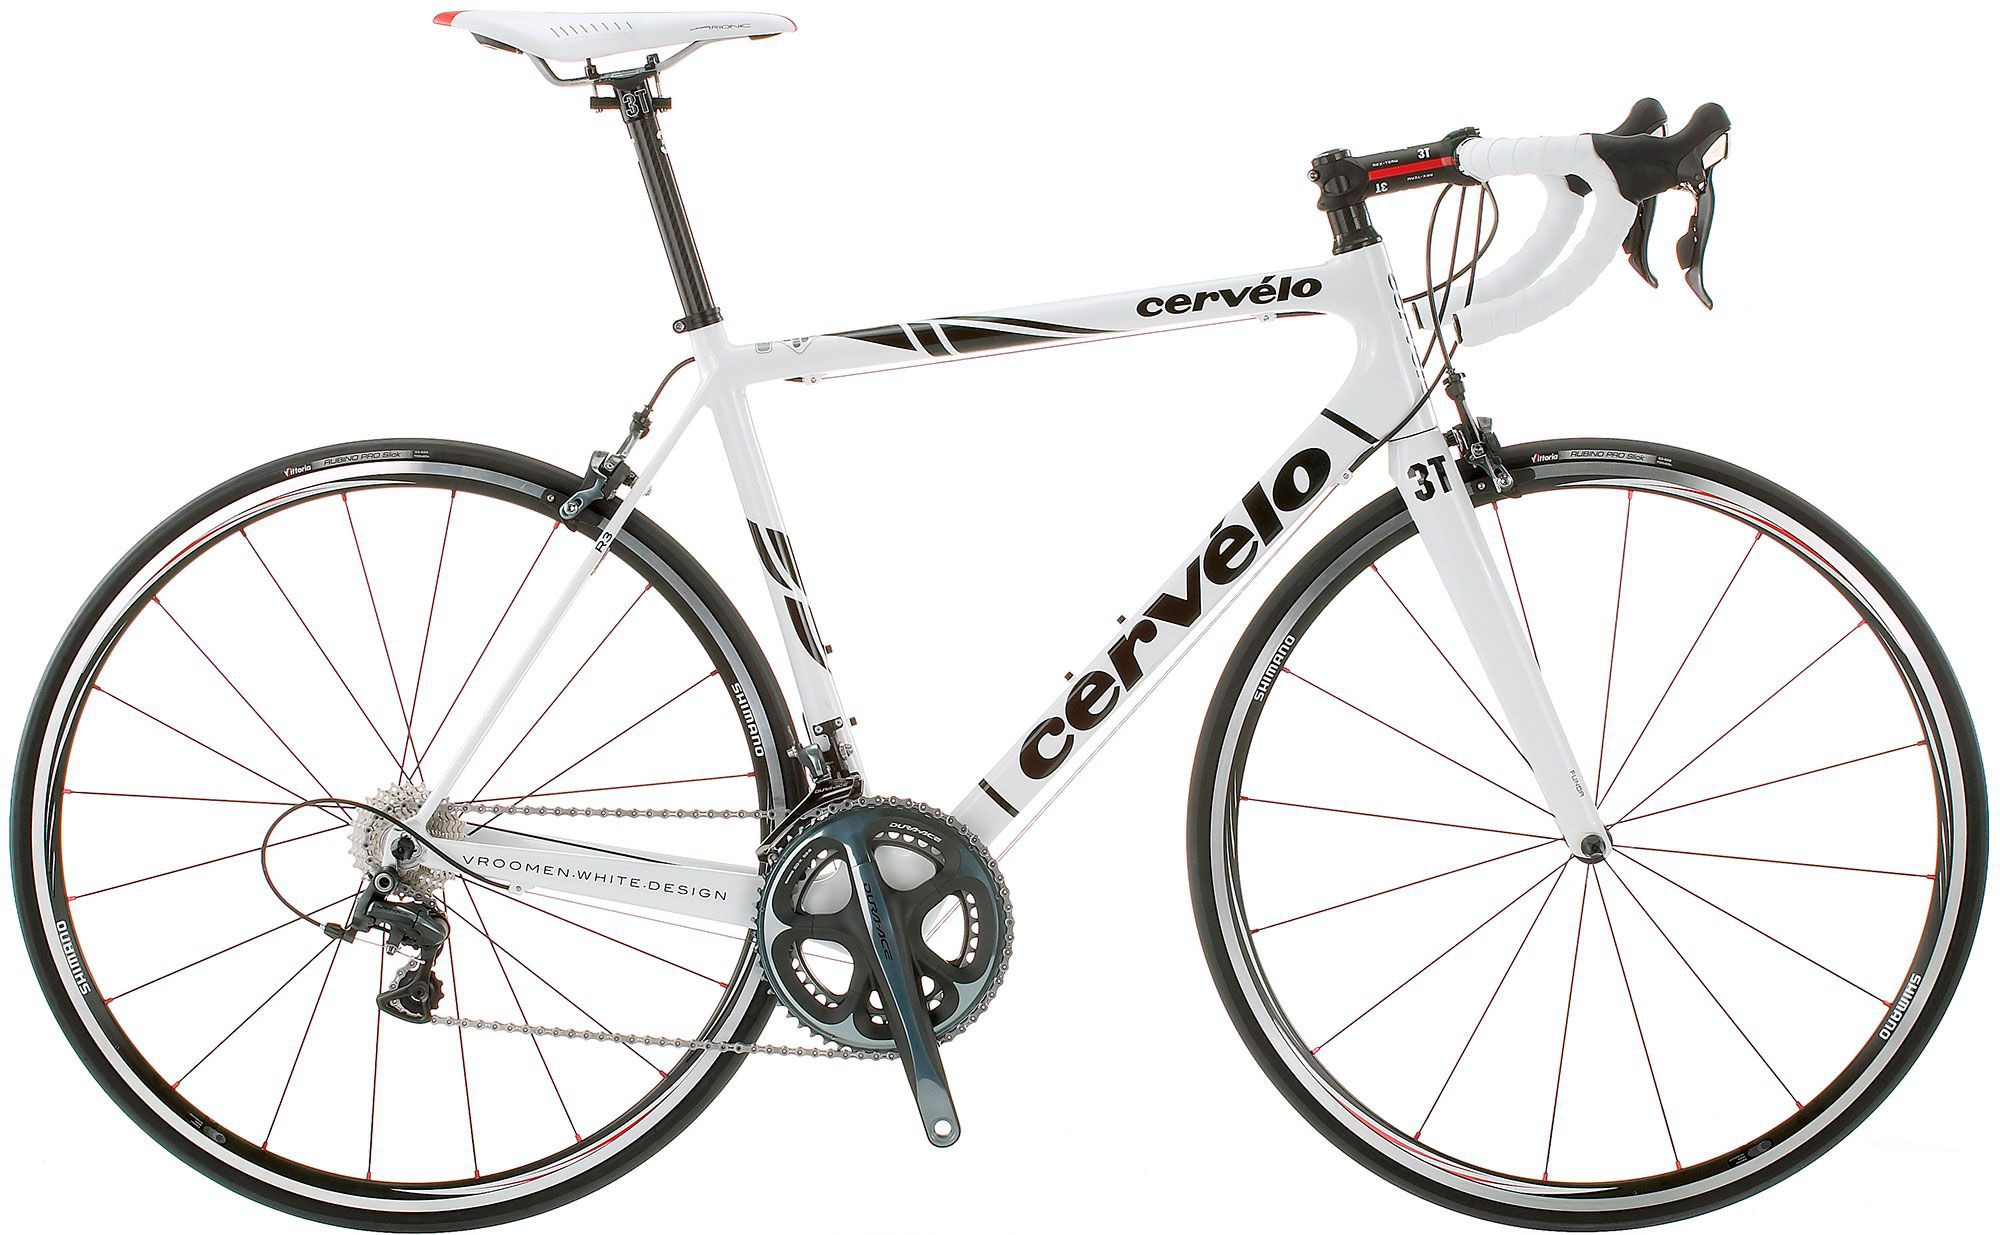 2009 Cervelo R3 Force - Bicycle Details 